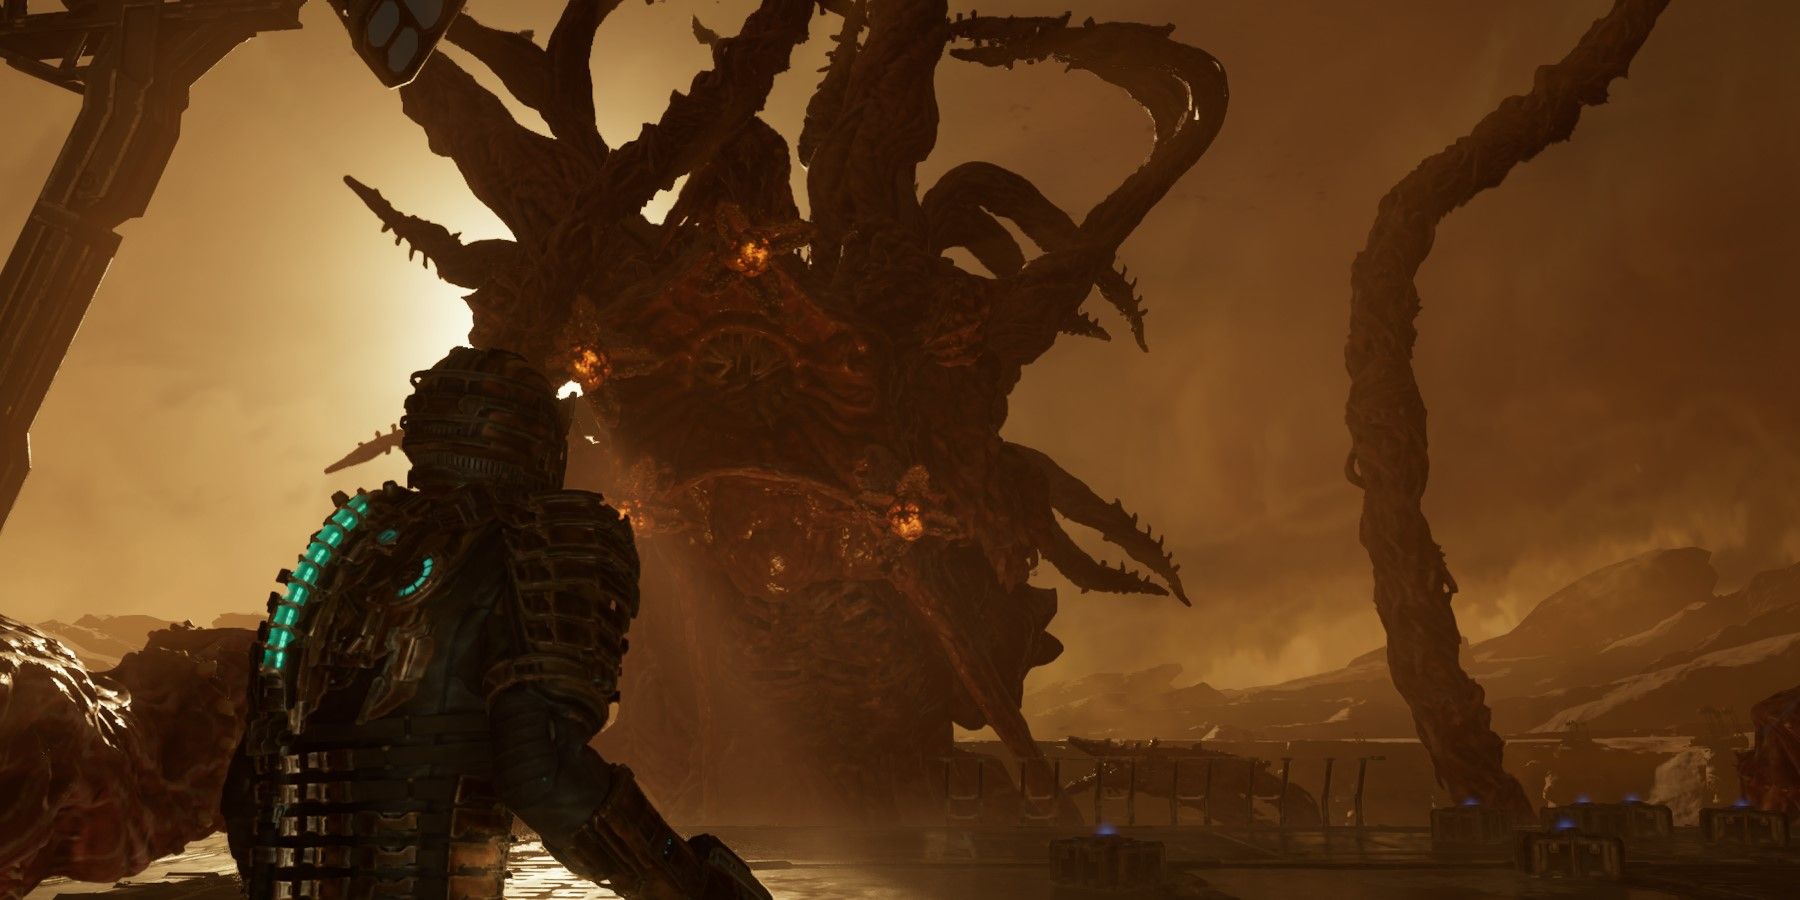 Issac Clarke faces down a giant tentacled alien creature on a barren planet